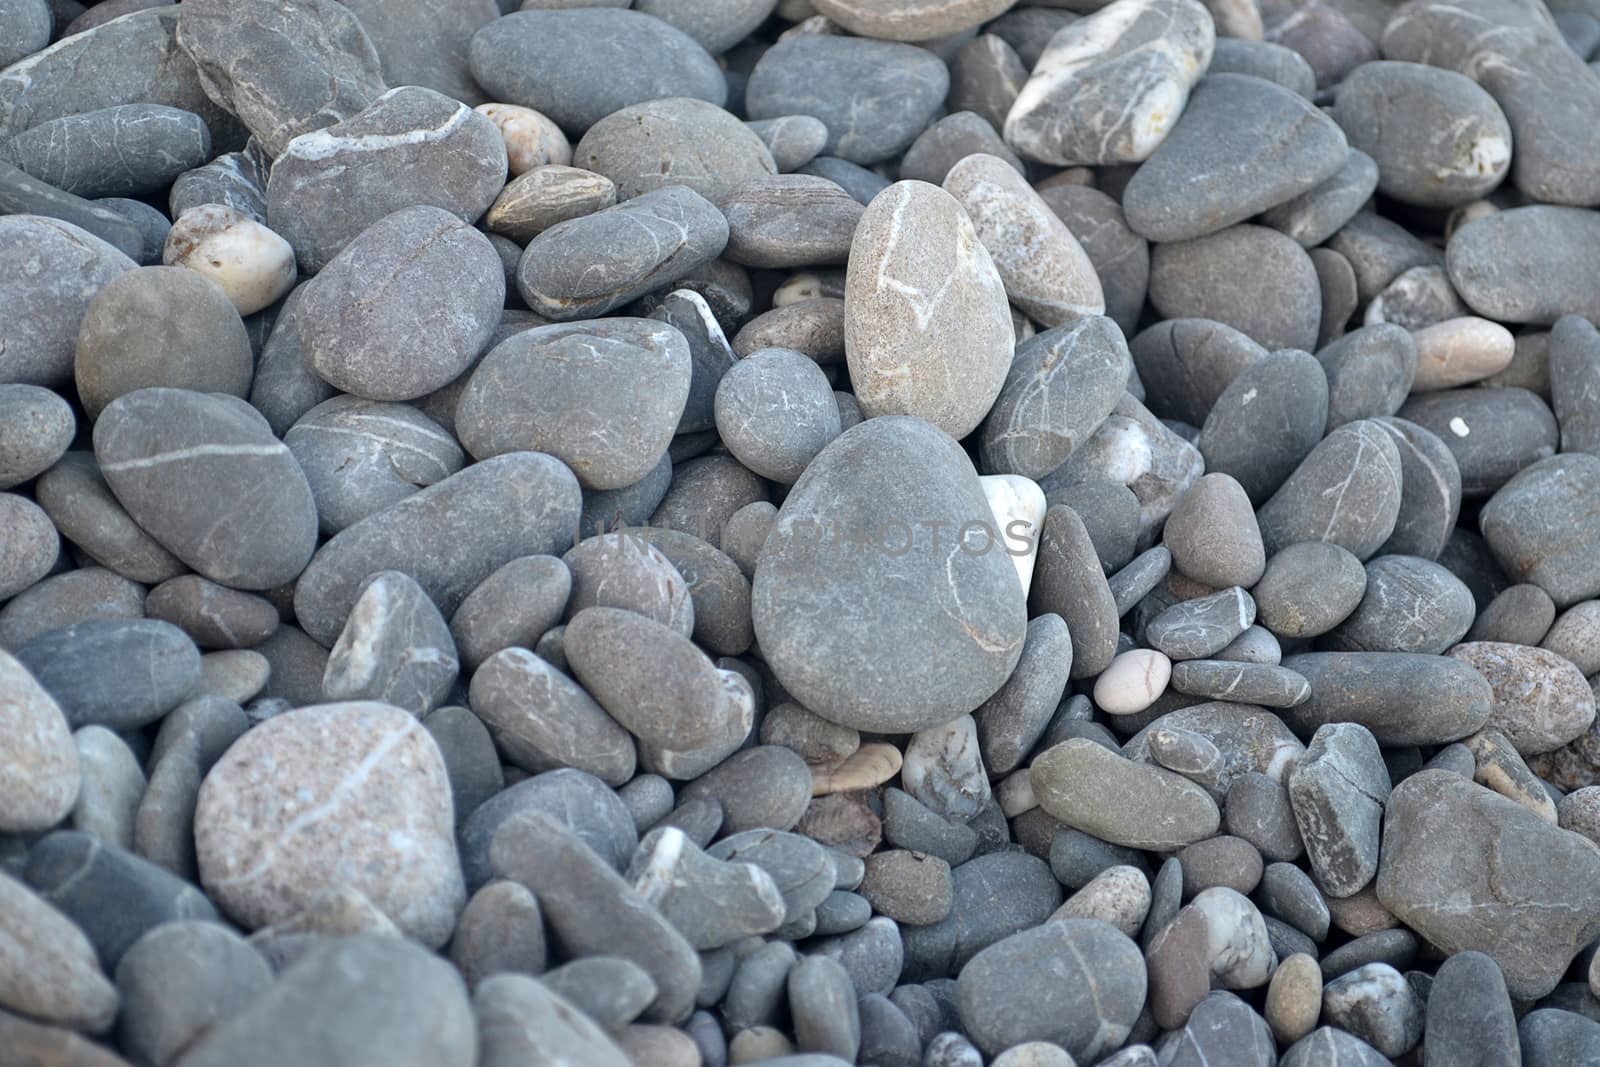 Pebbles on the beach by Irene1601